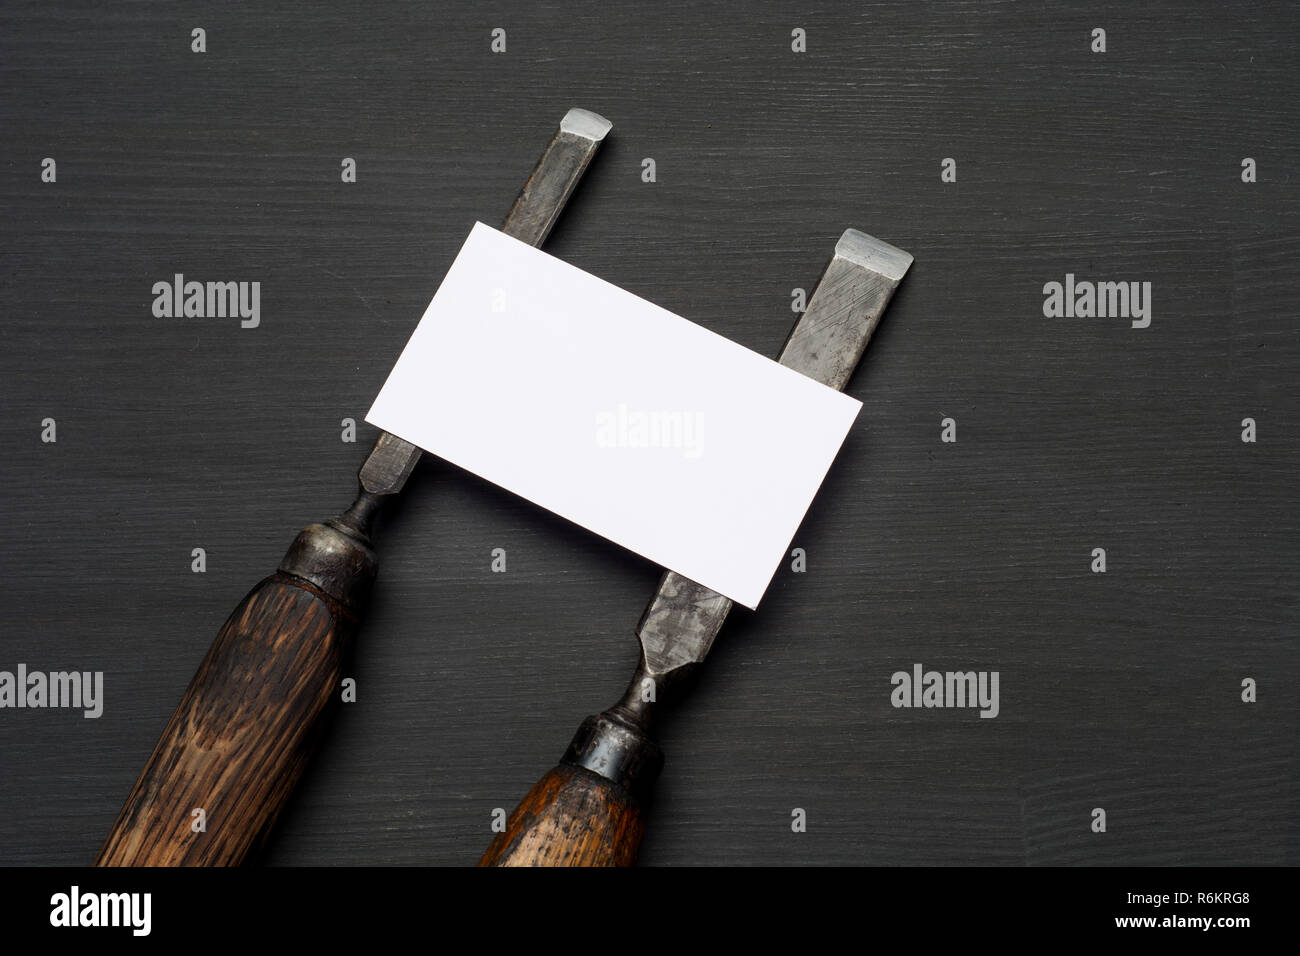 joinery tools on wood table background with business card and copy space. Stock Photo